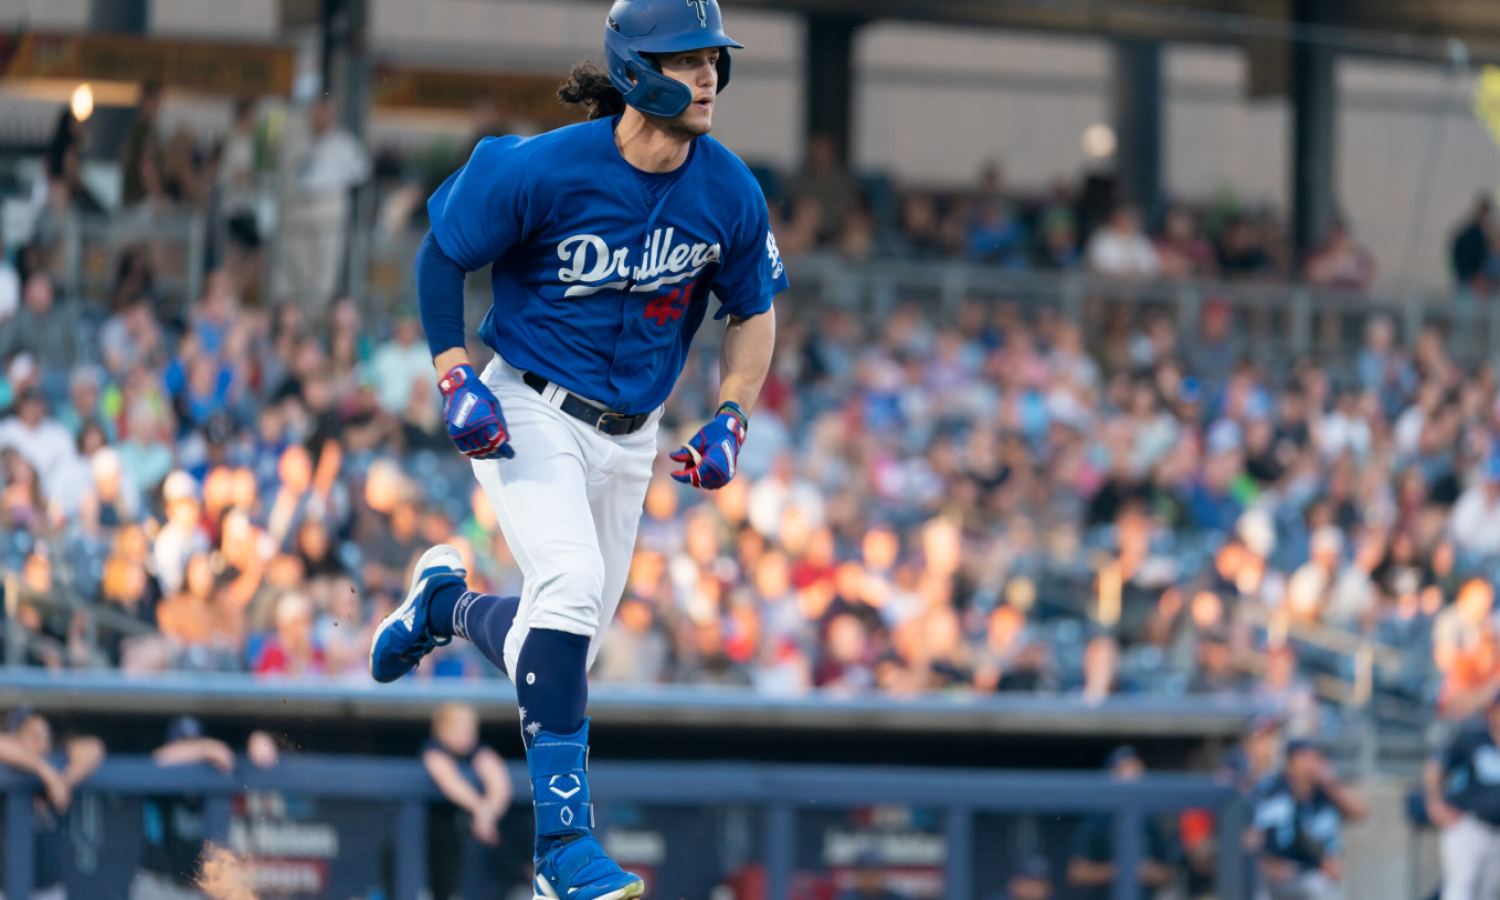 How Dodgers prospect Gavin Lux developed into the hottest hitter